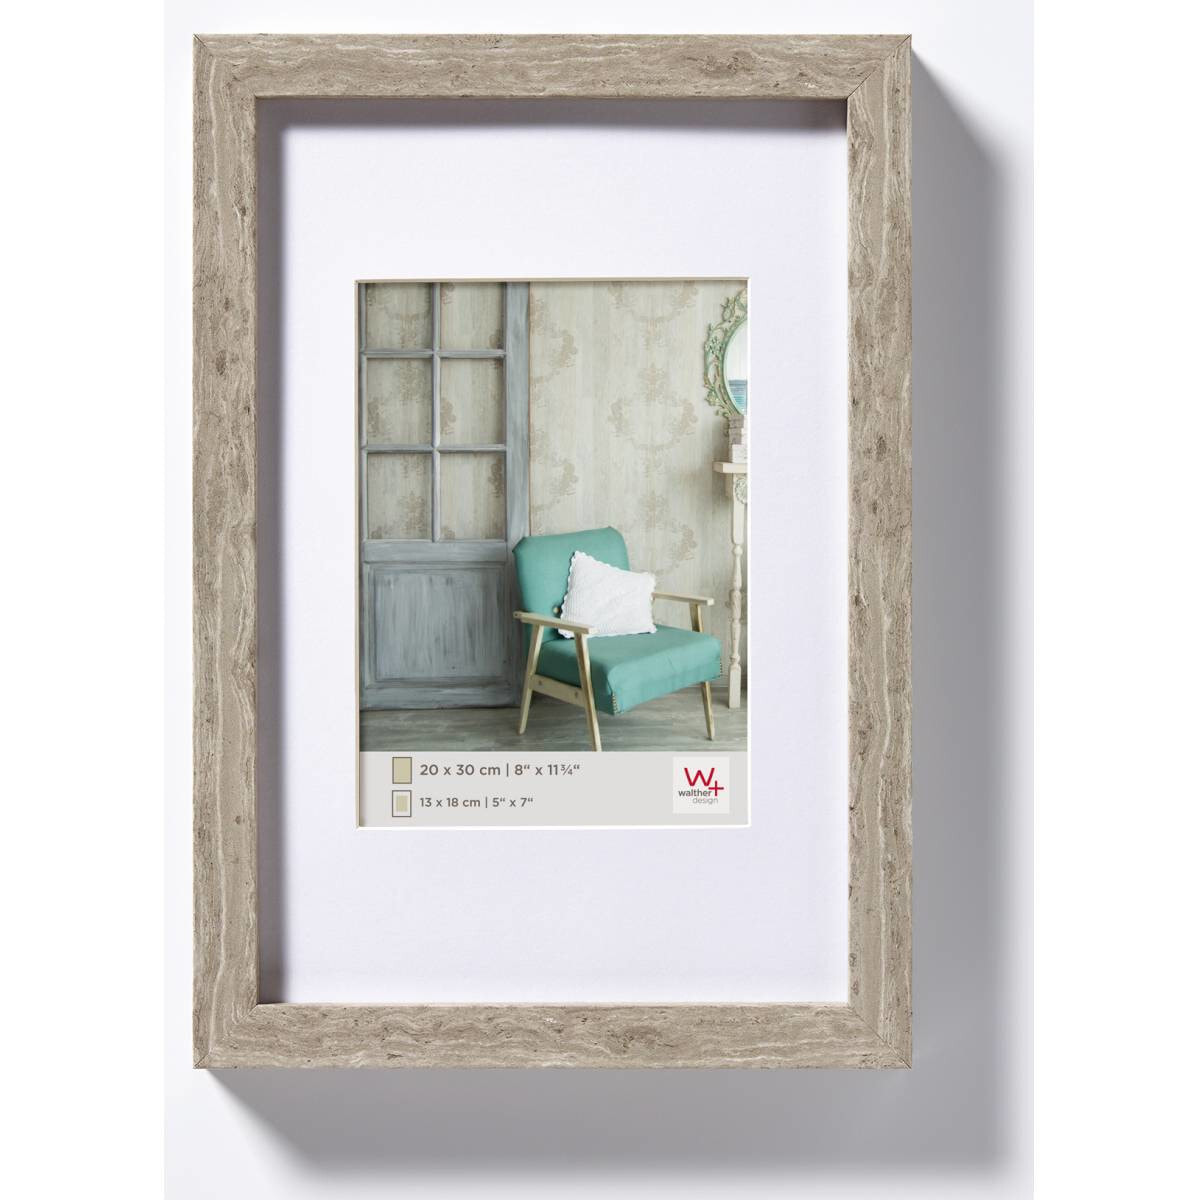 walther design EA030D - Wood - Grey - Single picture frame - 13 x 18 cm - Square - 230 mm